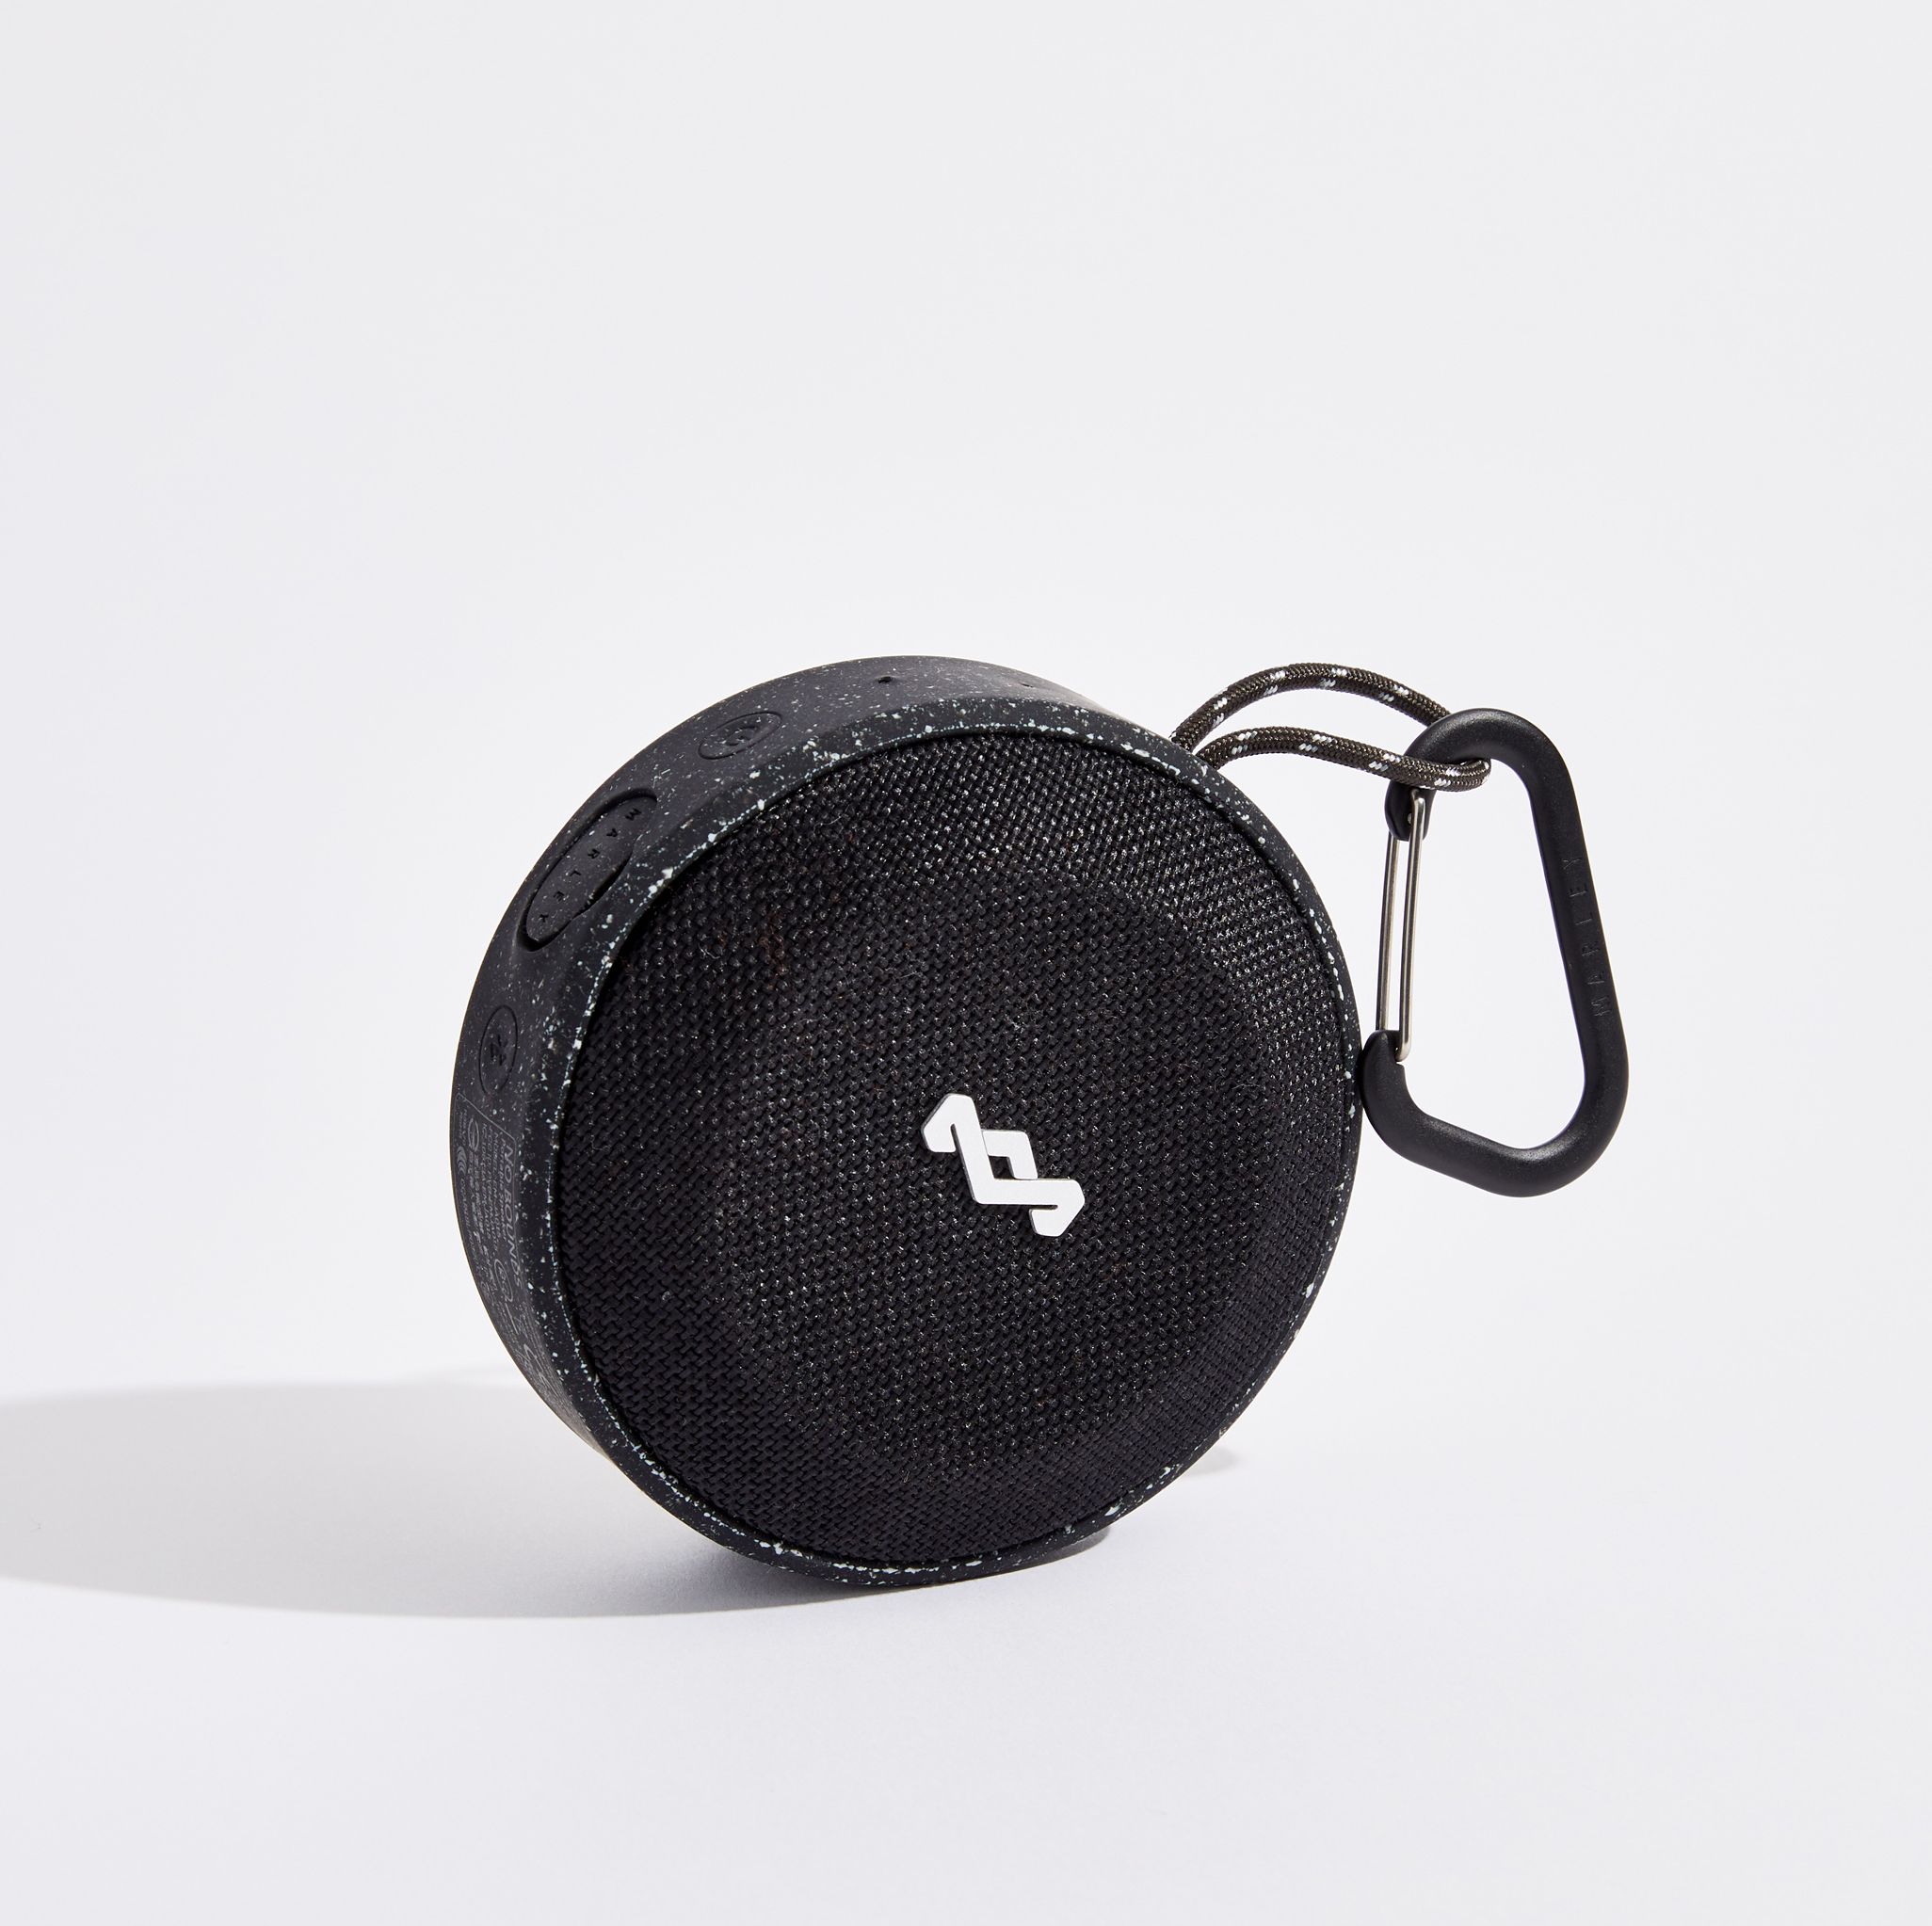 The Tiny But Thunderous Bluetooth Speaker That Defies Convention